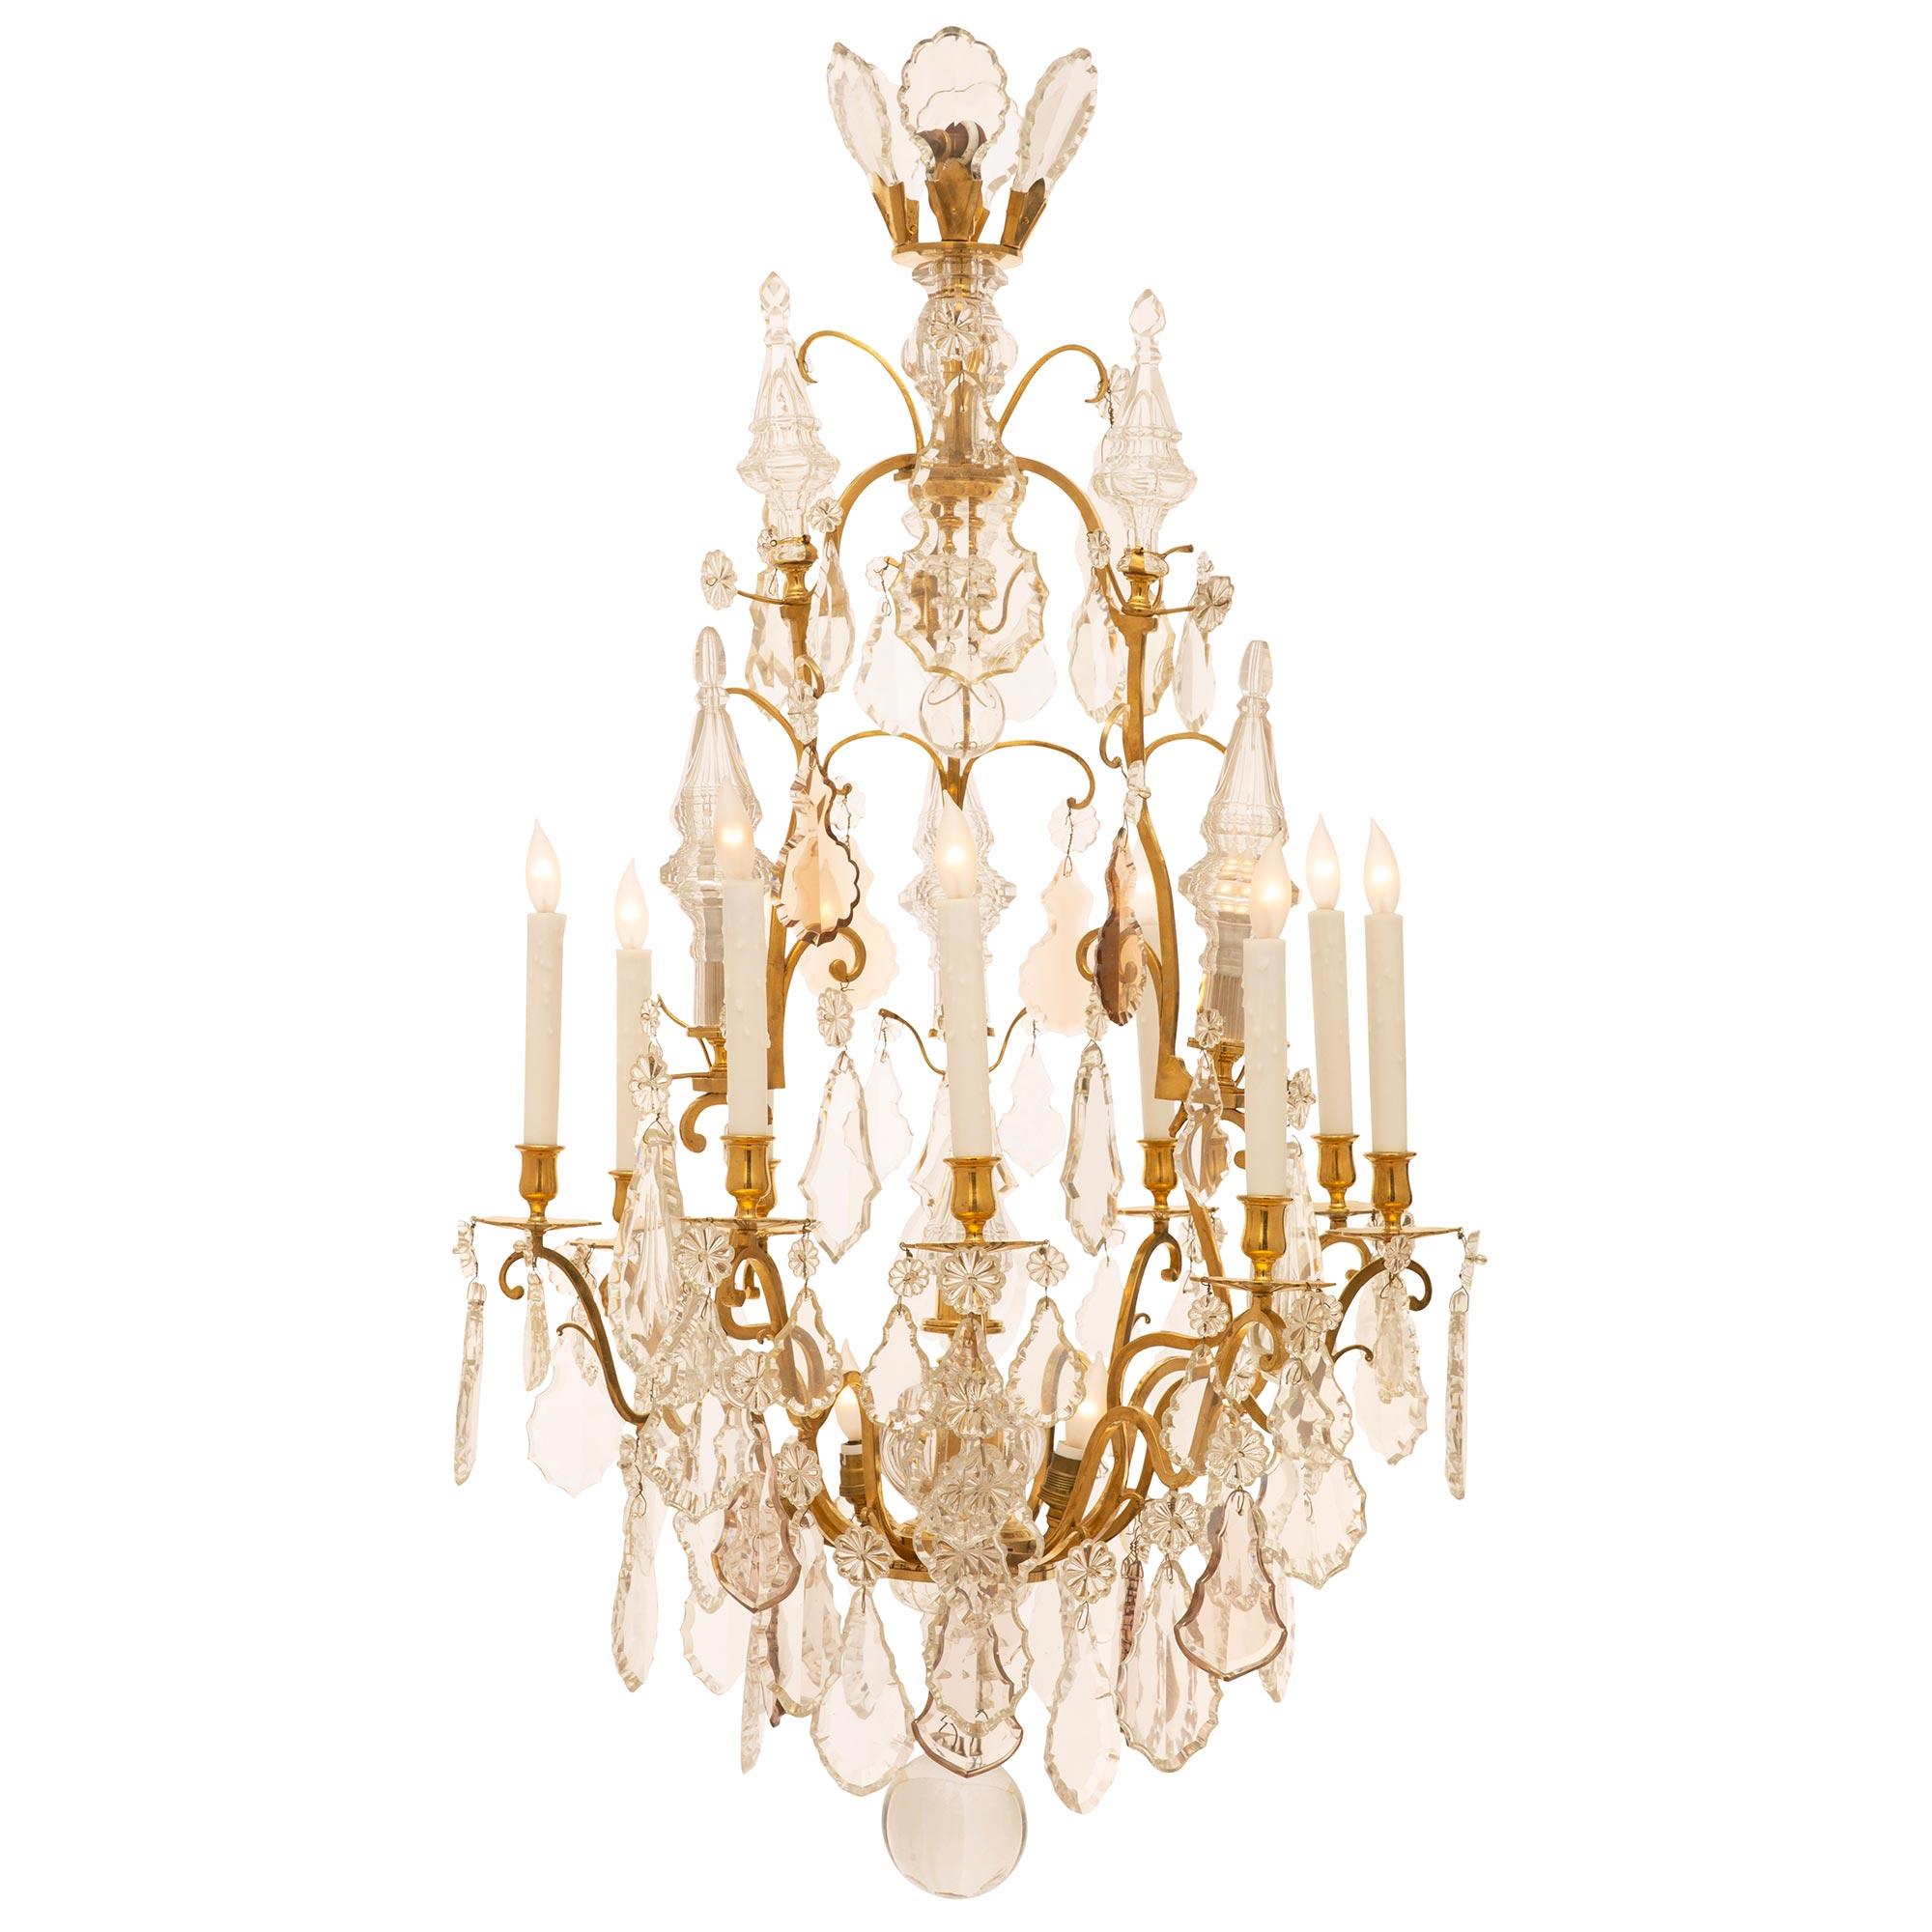 An exquisite French Louis XV st. fifteen light Baccarat crystal chandelier. With nine impressive double S scrolled ormolu arms opulently decorated with amethyst and clear crystal lyre and kite shaped pendants above the smoky crystal ball. At the